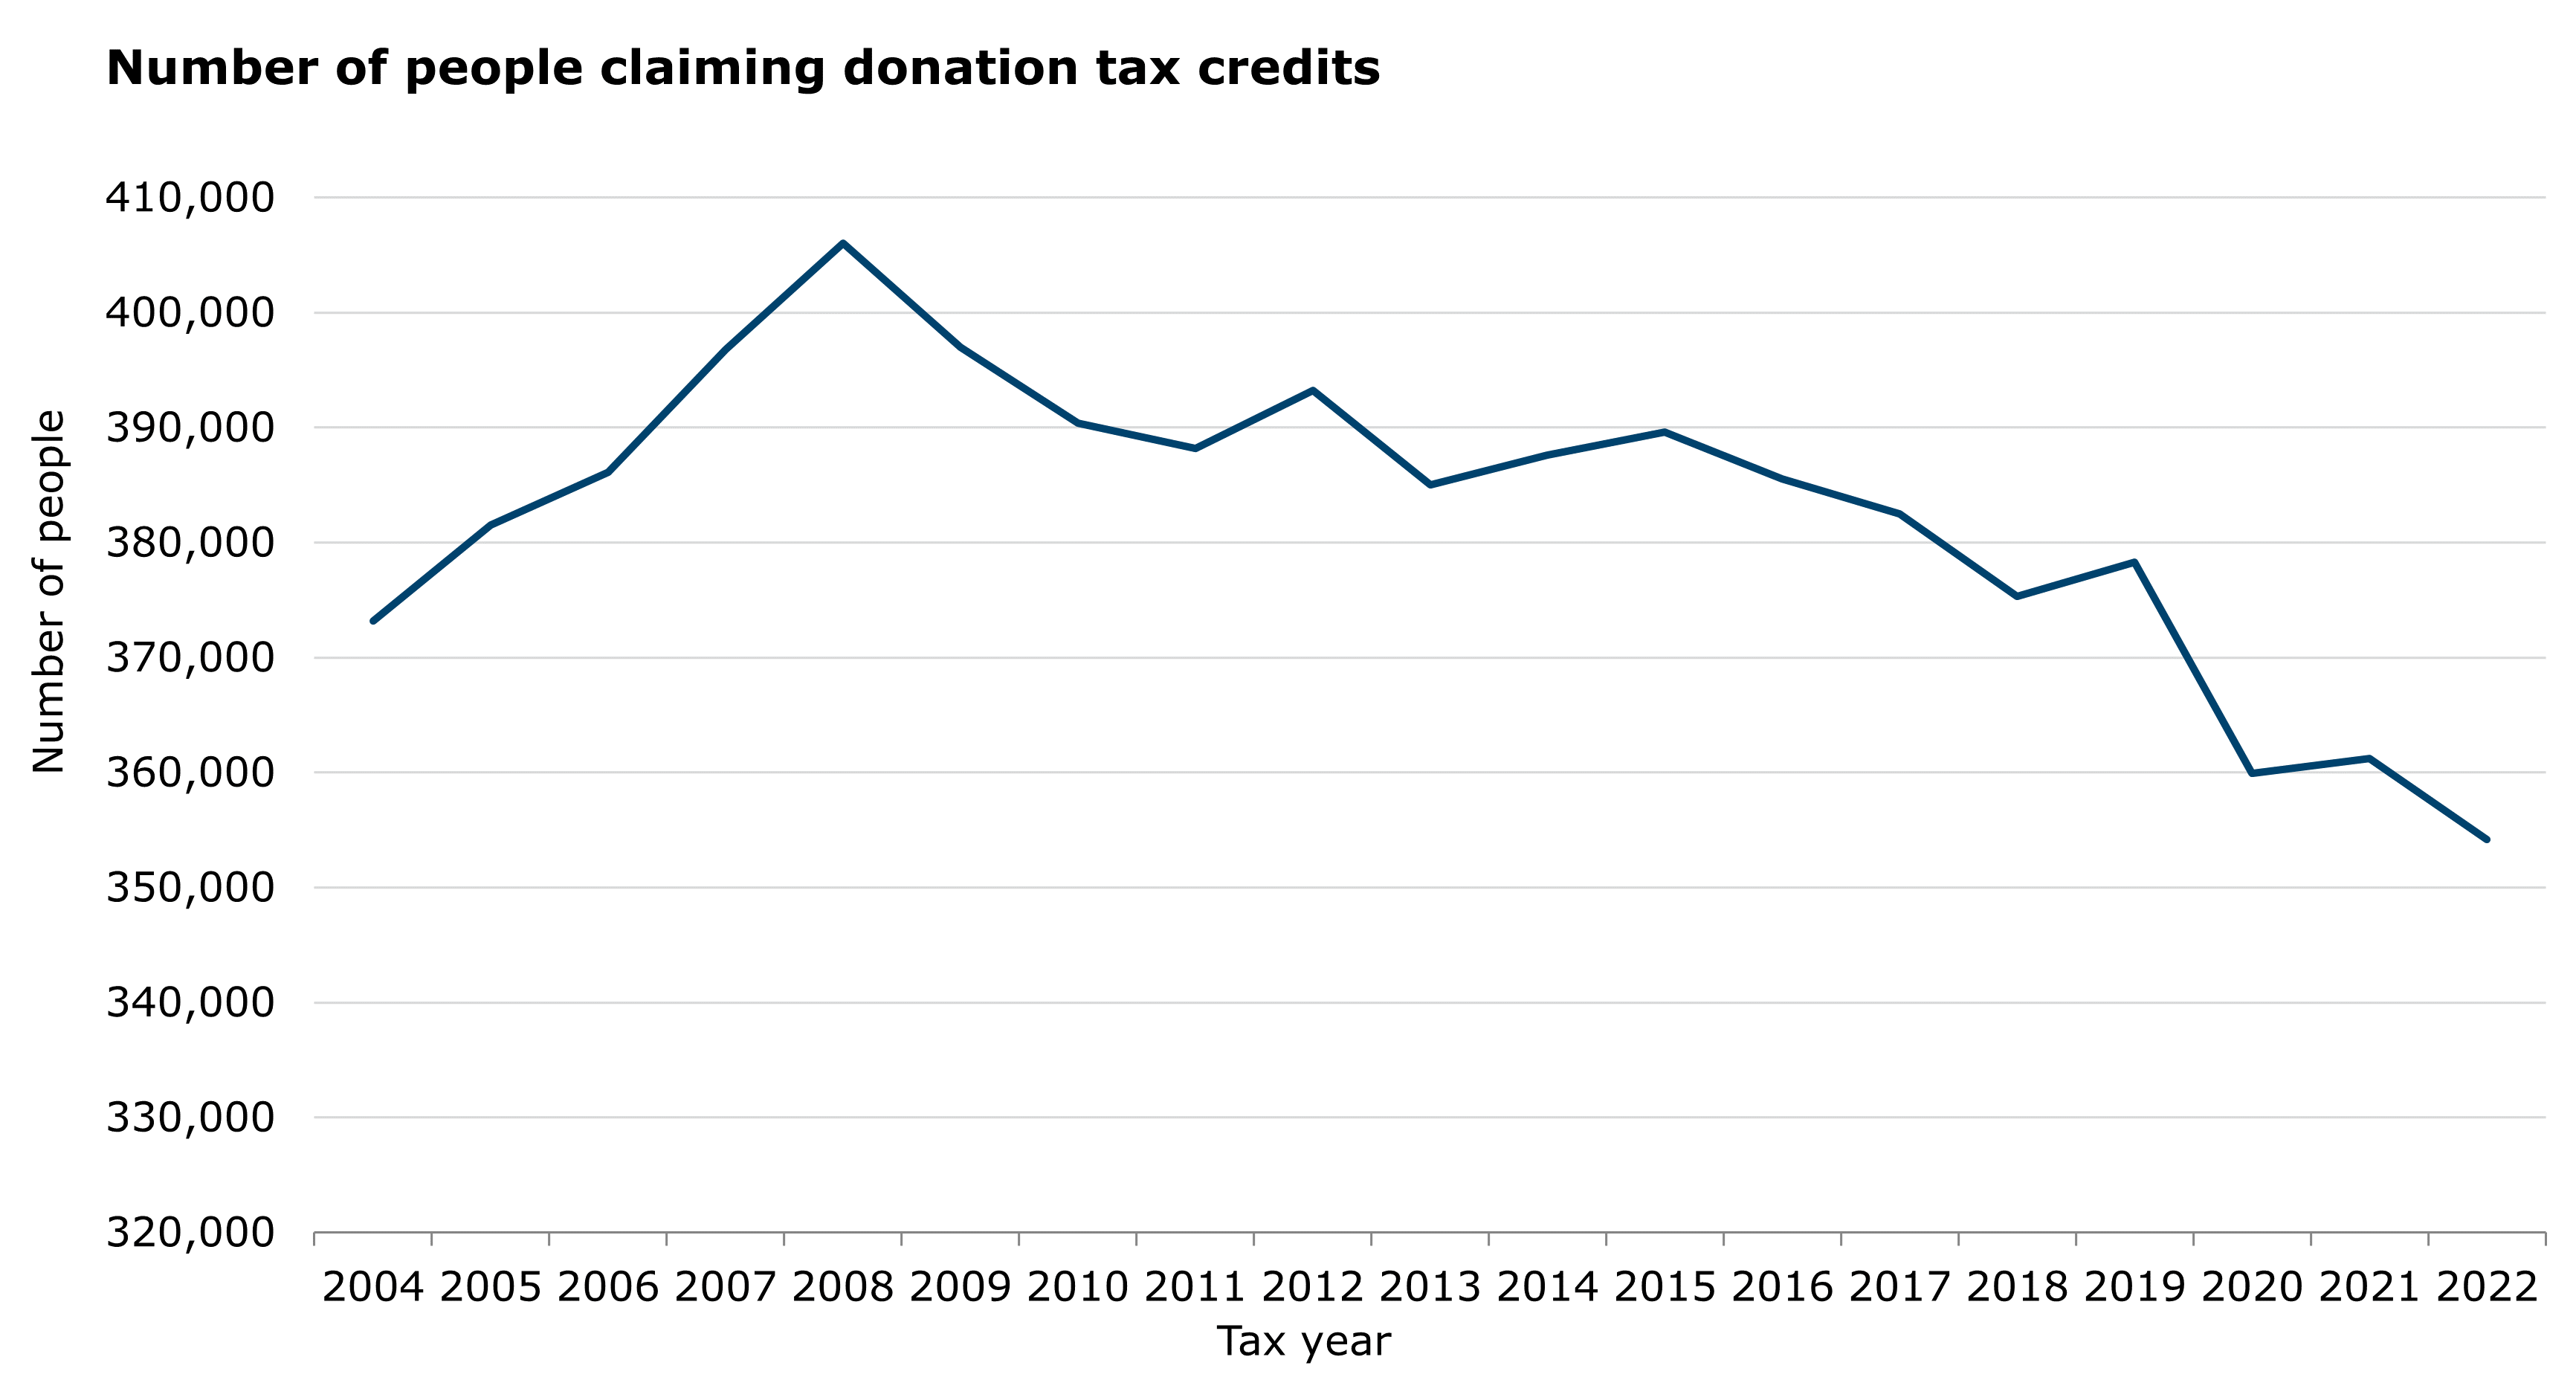 This graph has one line that show the number of people who have claimed donation tax credits per year between the 2004 tax year and the 2022 tax year. This number increased from 373,200 in 2004 to 406,000 in 2008, and has then decreased towards 350,500 in 2021. There was a slight increase to 352,100 for the 2022 year.